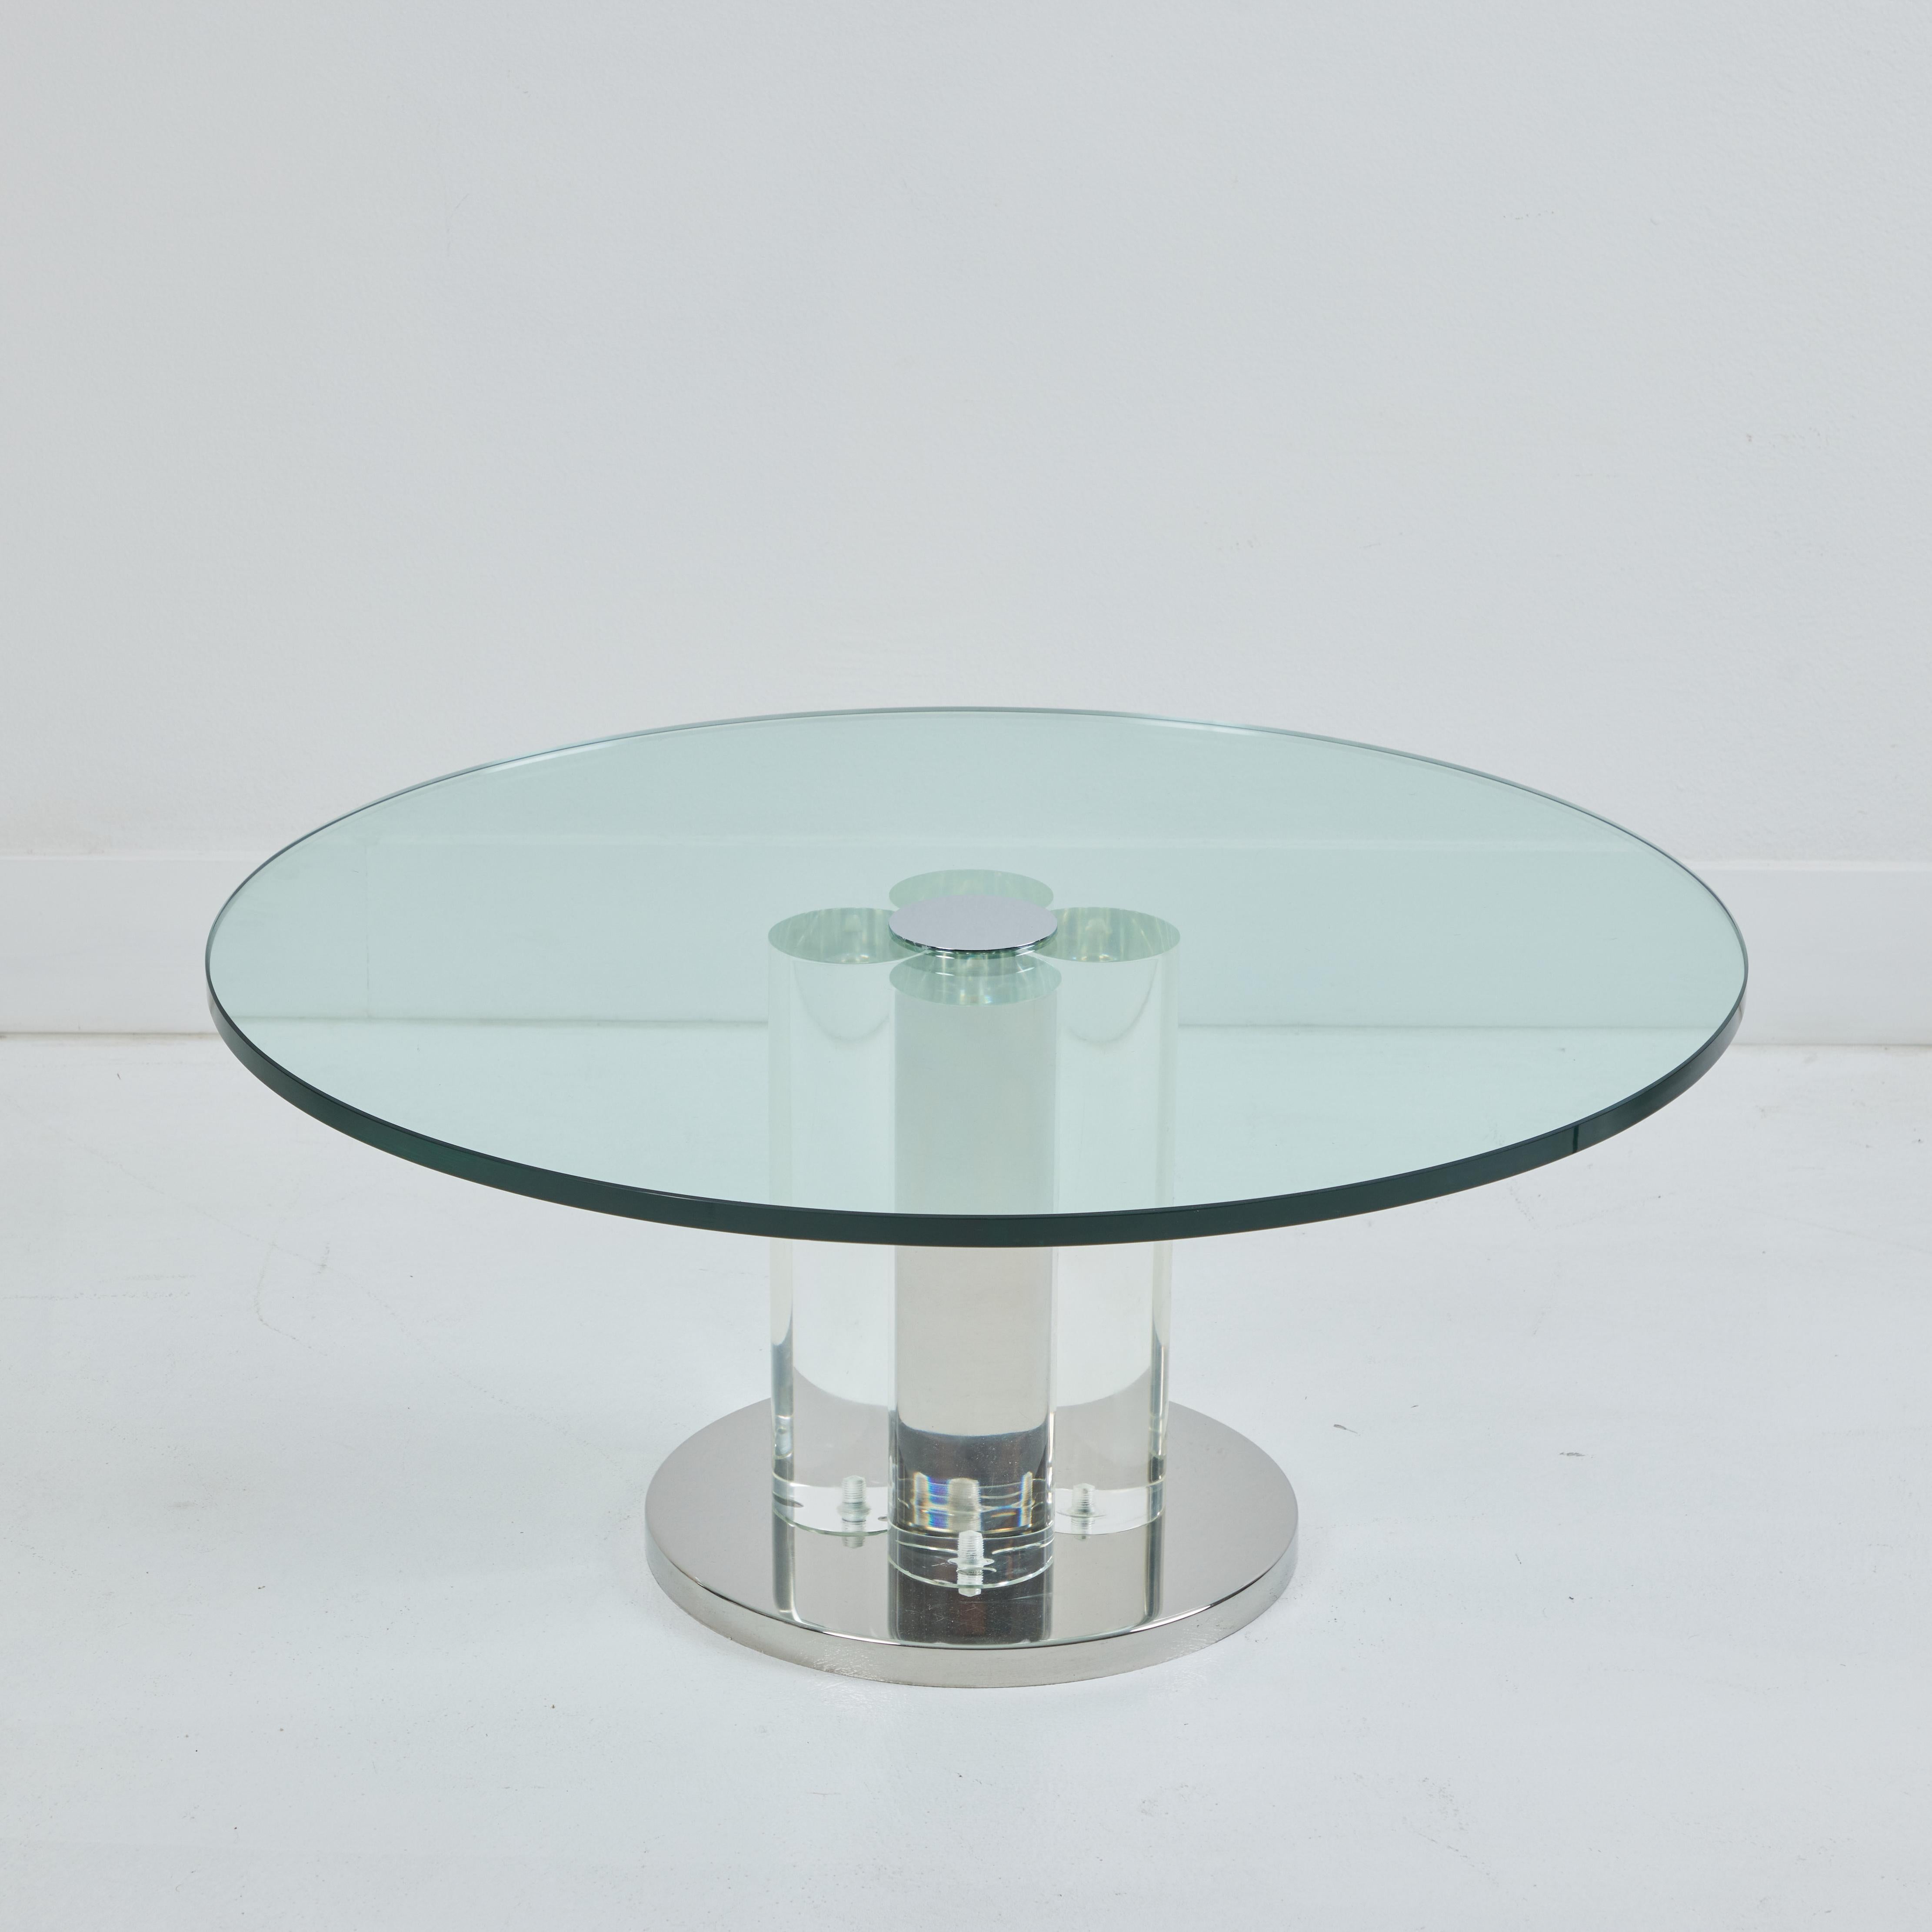 In the style of Charles Hollis Jones, this is a wonderful lucite and chrome base coffee table. At 35.5